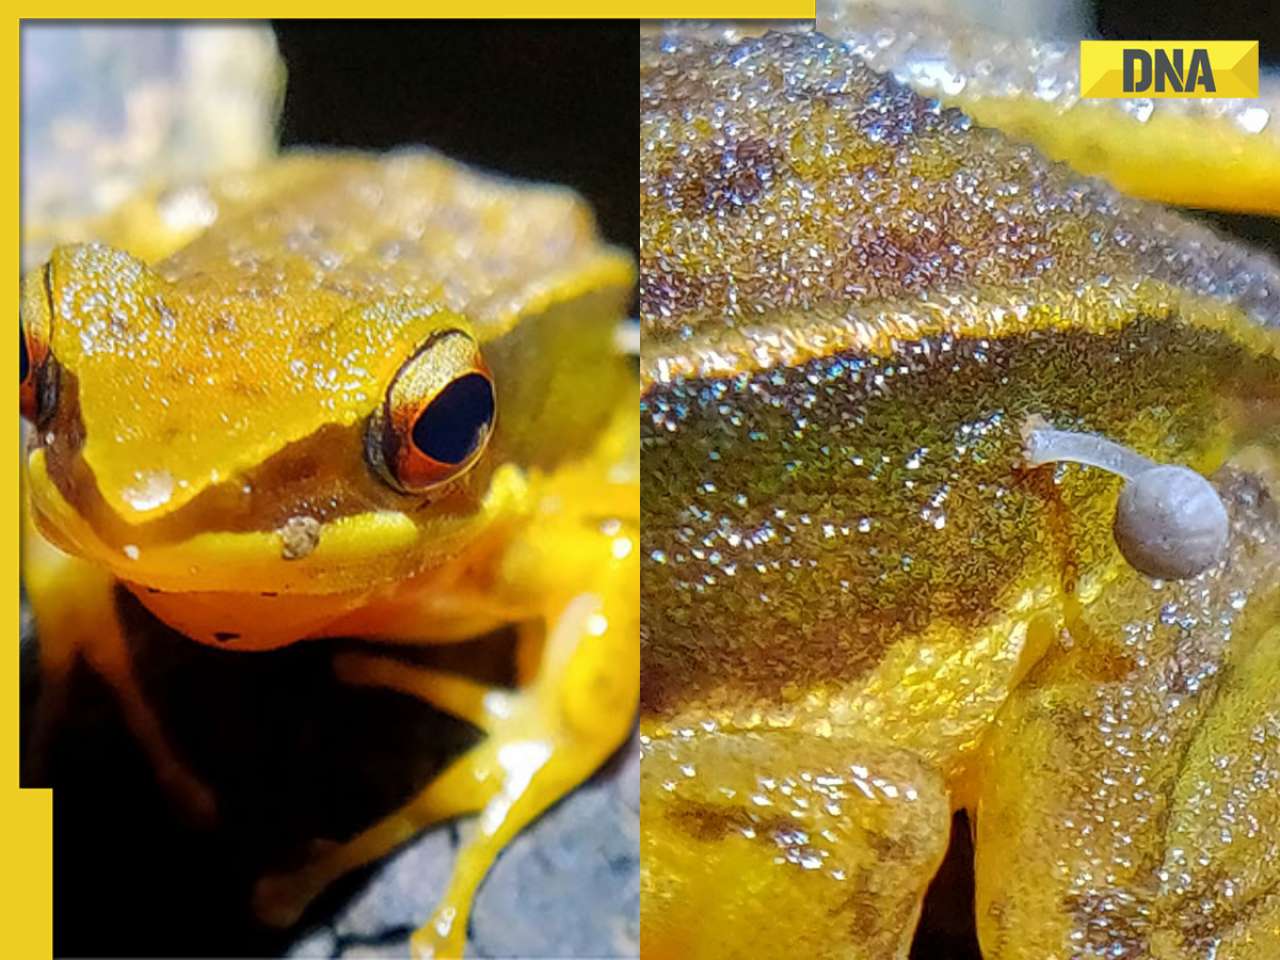 Researchers left baffled by discovery of frog with mushroom sprouting from skin, details inside